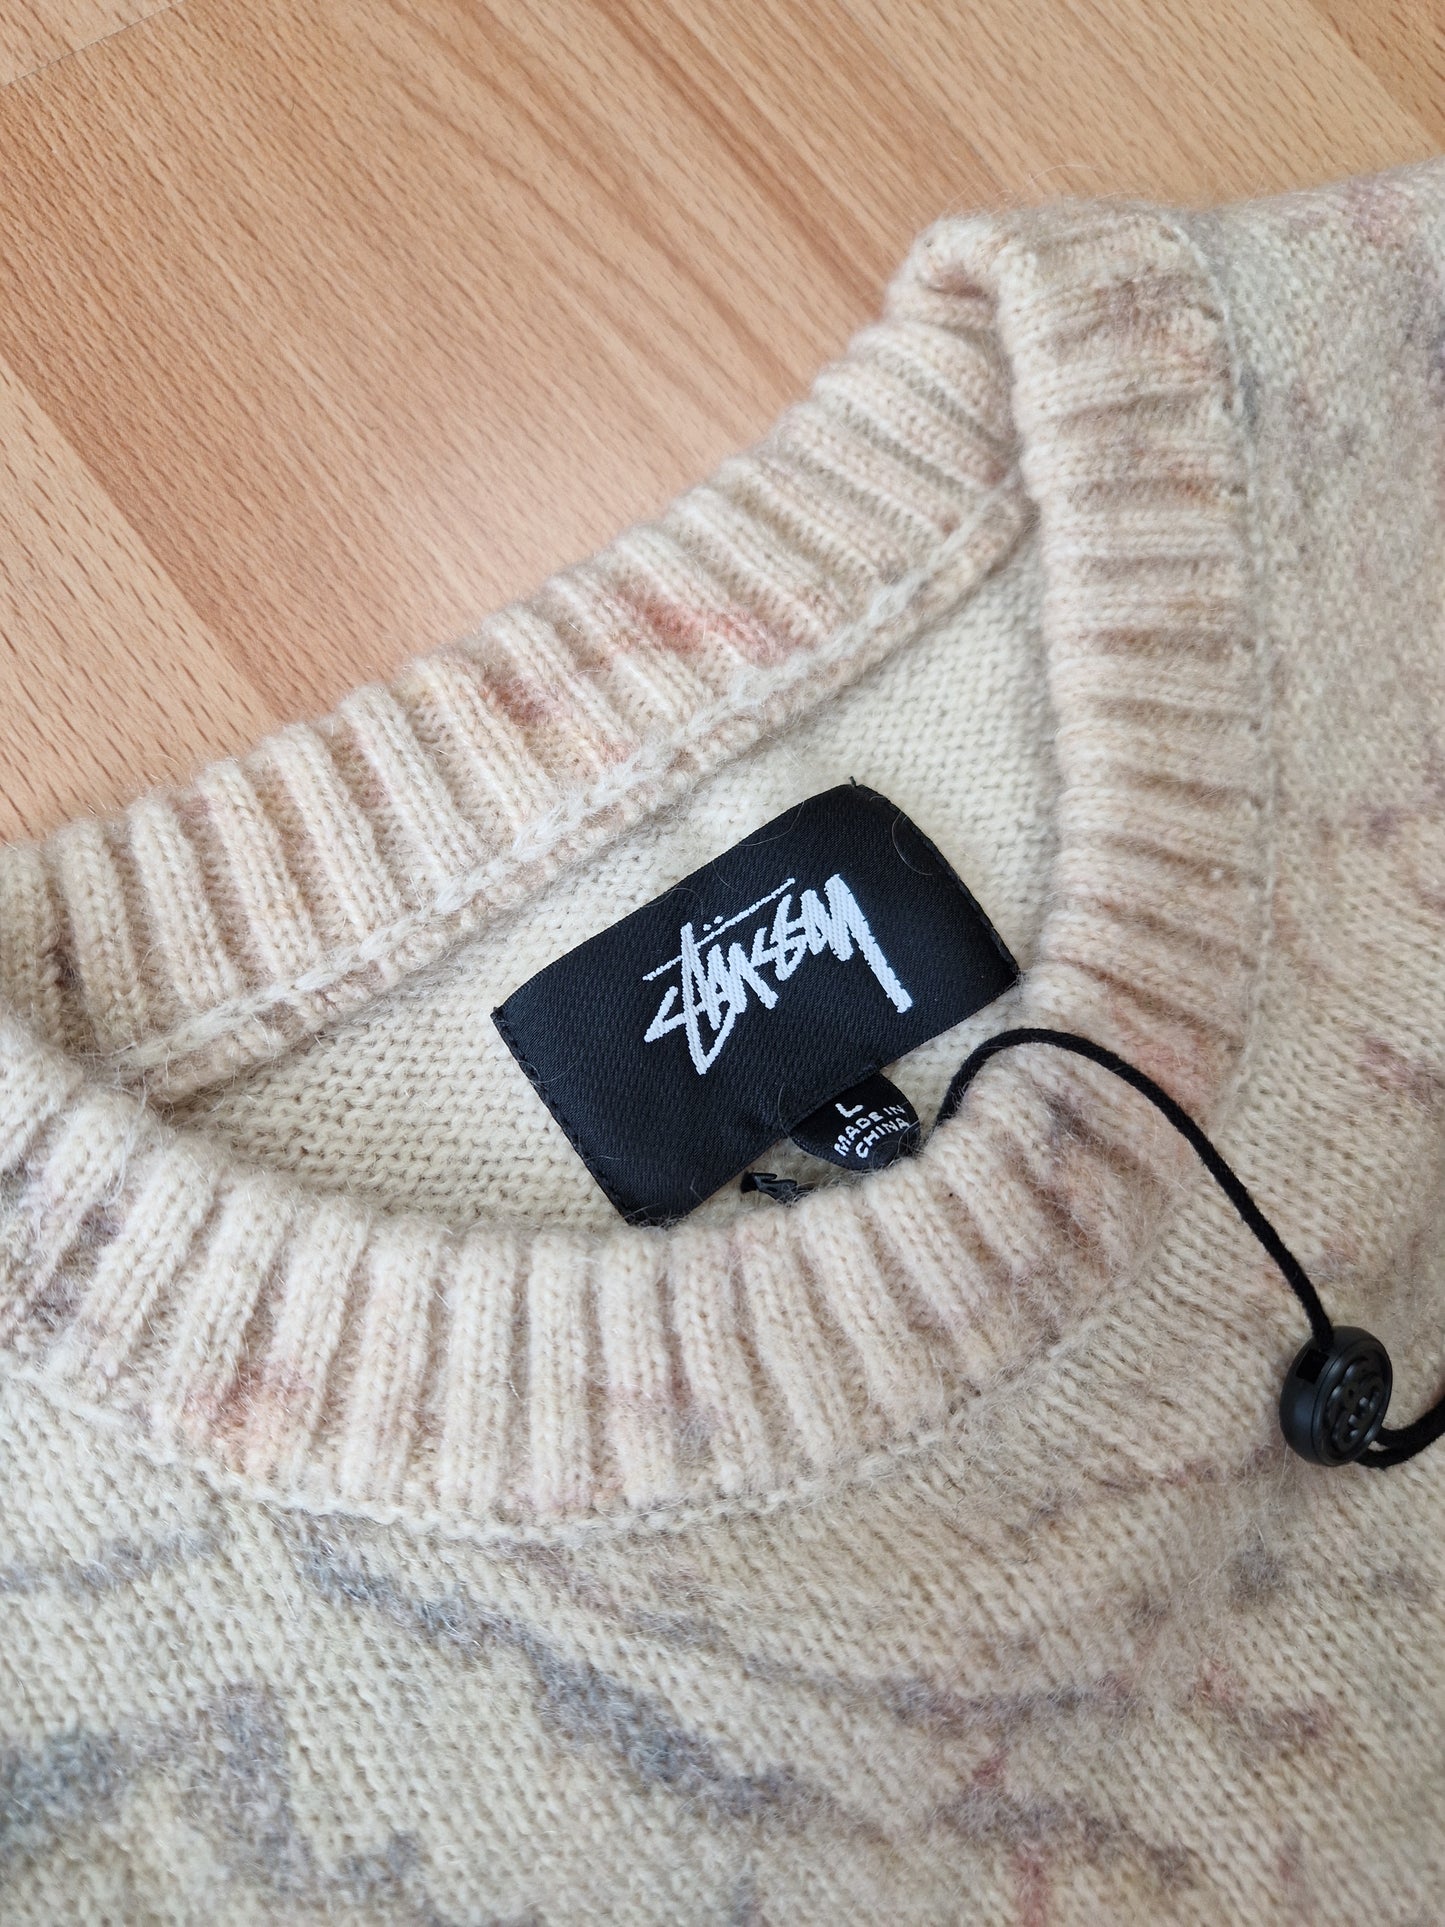 Stussy 'Wings Print' Knitted Sweater BNWT (L)